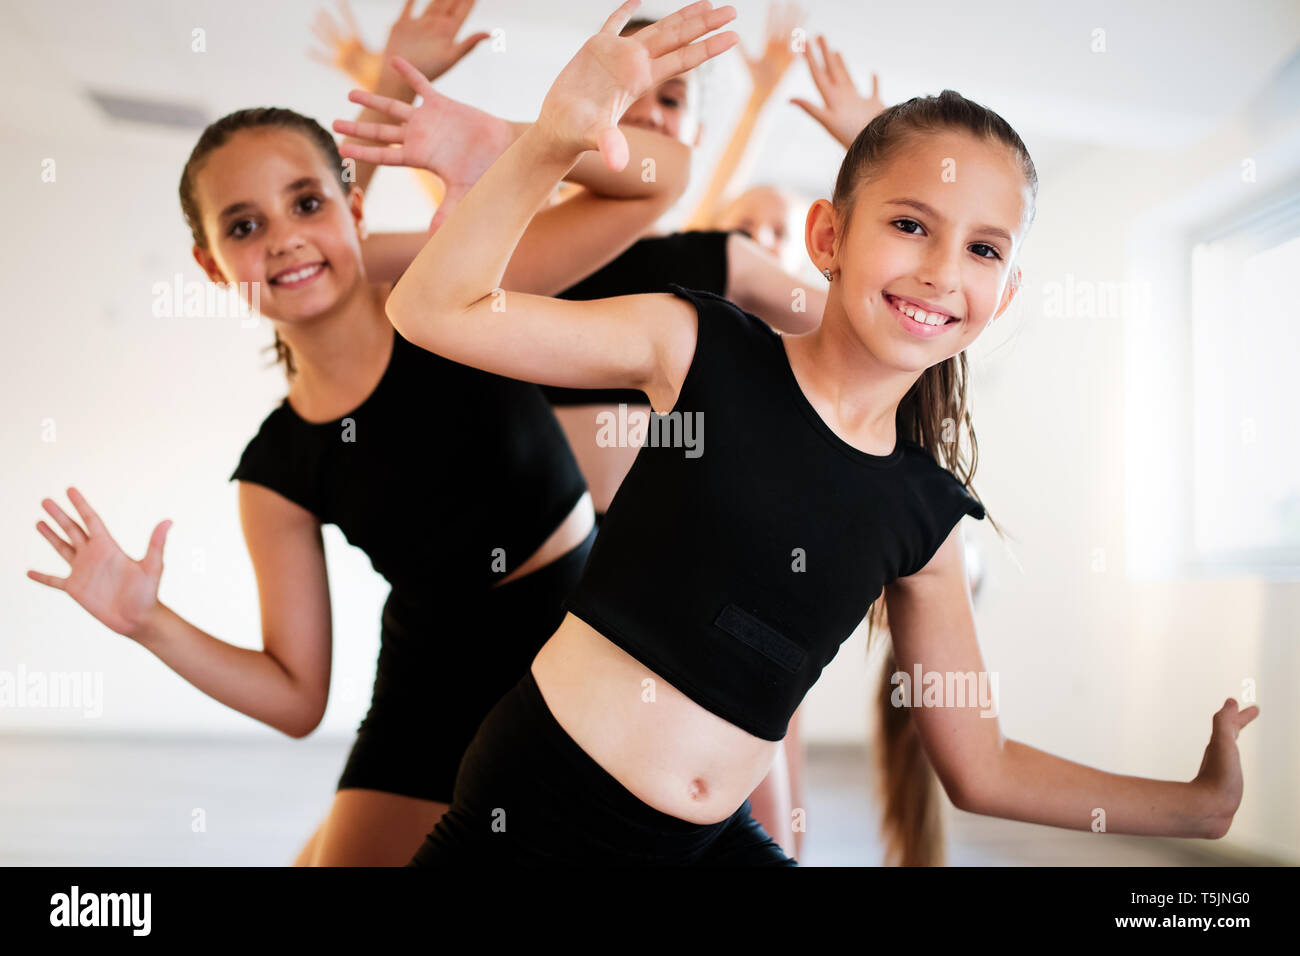 Group of young girls practicing and exercising modern ballet dance. Stock Photo